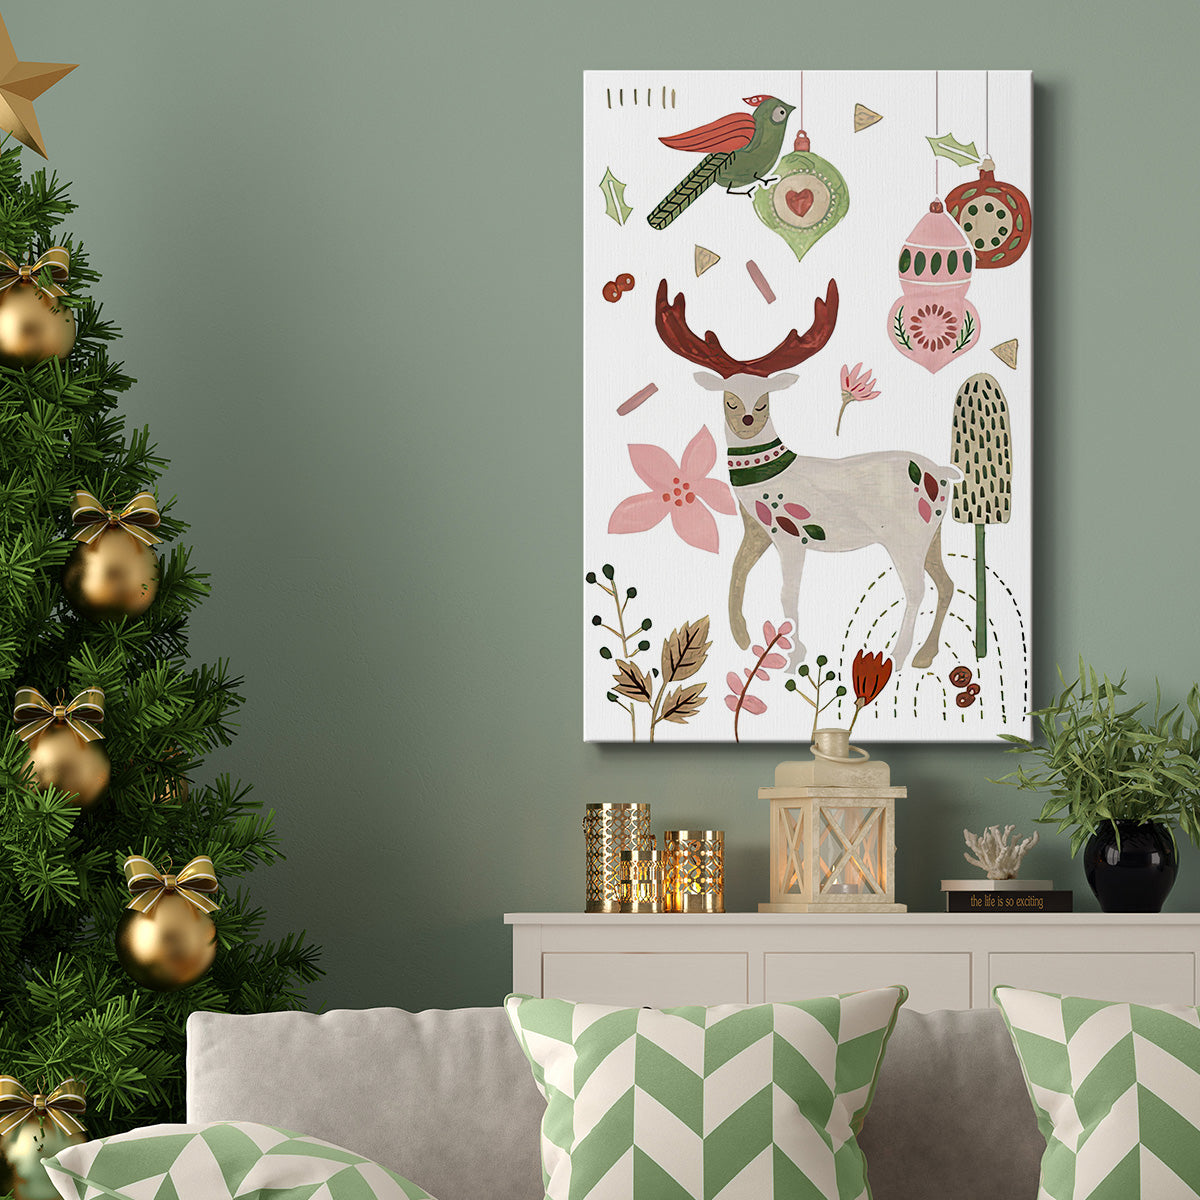 Reindeer Wishes Collection B - Gallery Wrapped Canvas